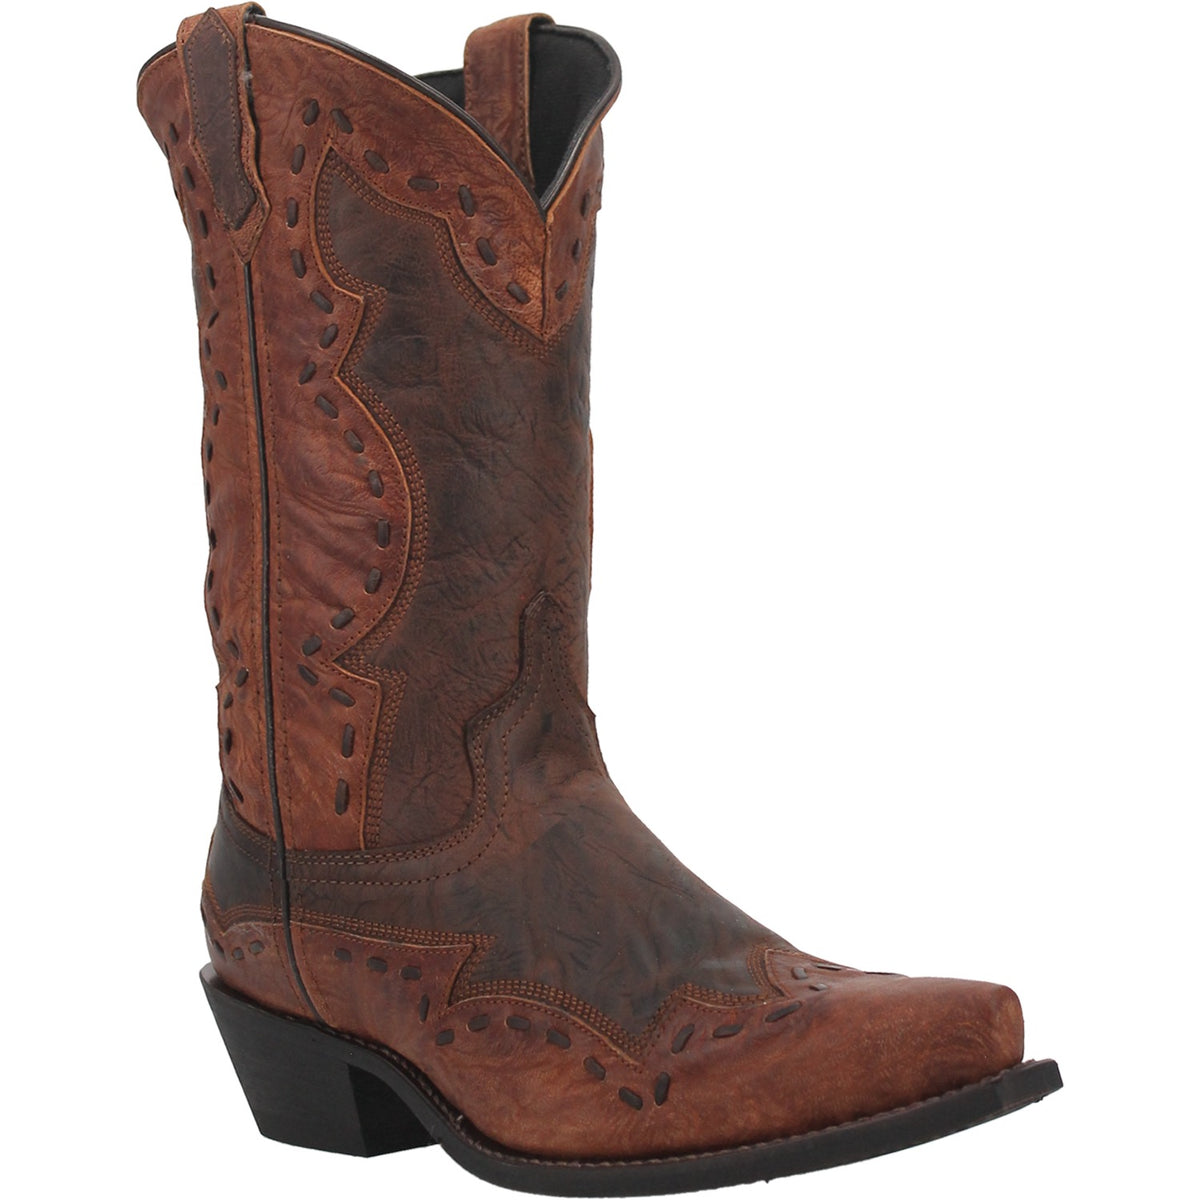 RONNIE LEATHER BOOT Cover